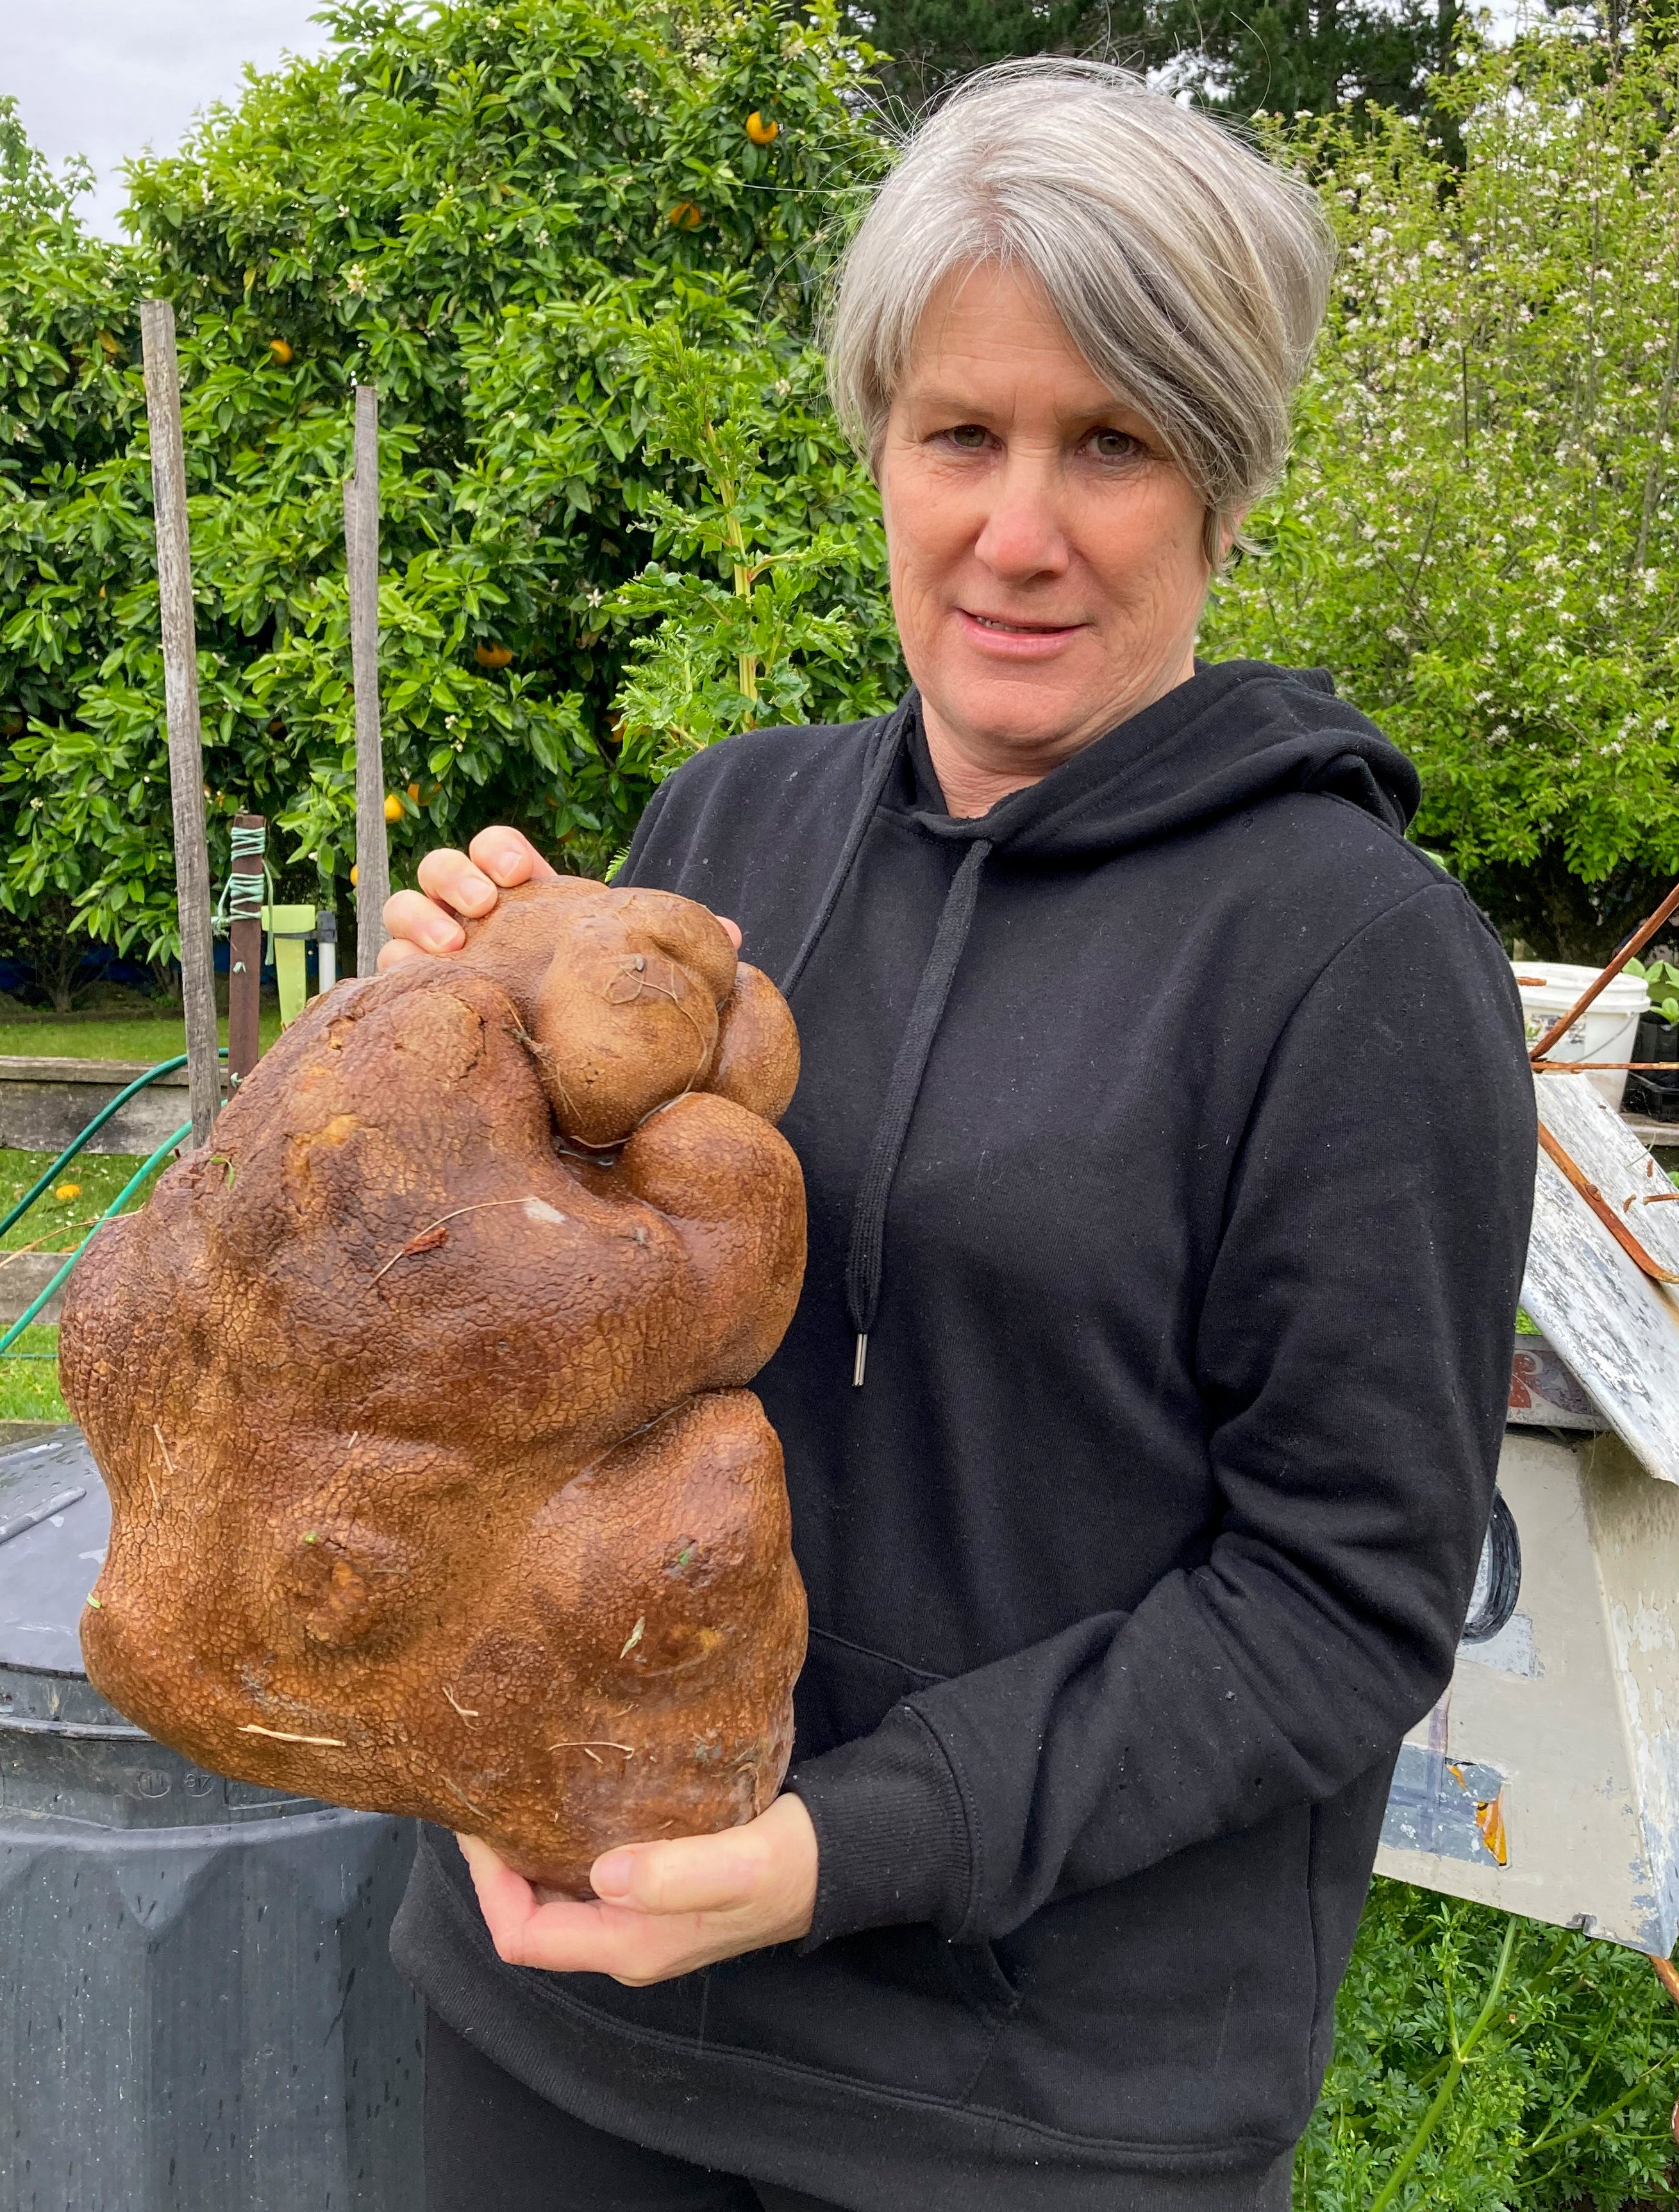 Doug the ugly New Zealand potato could be worlds biggest The Independent photo